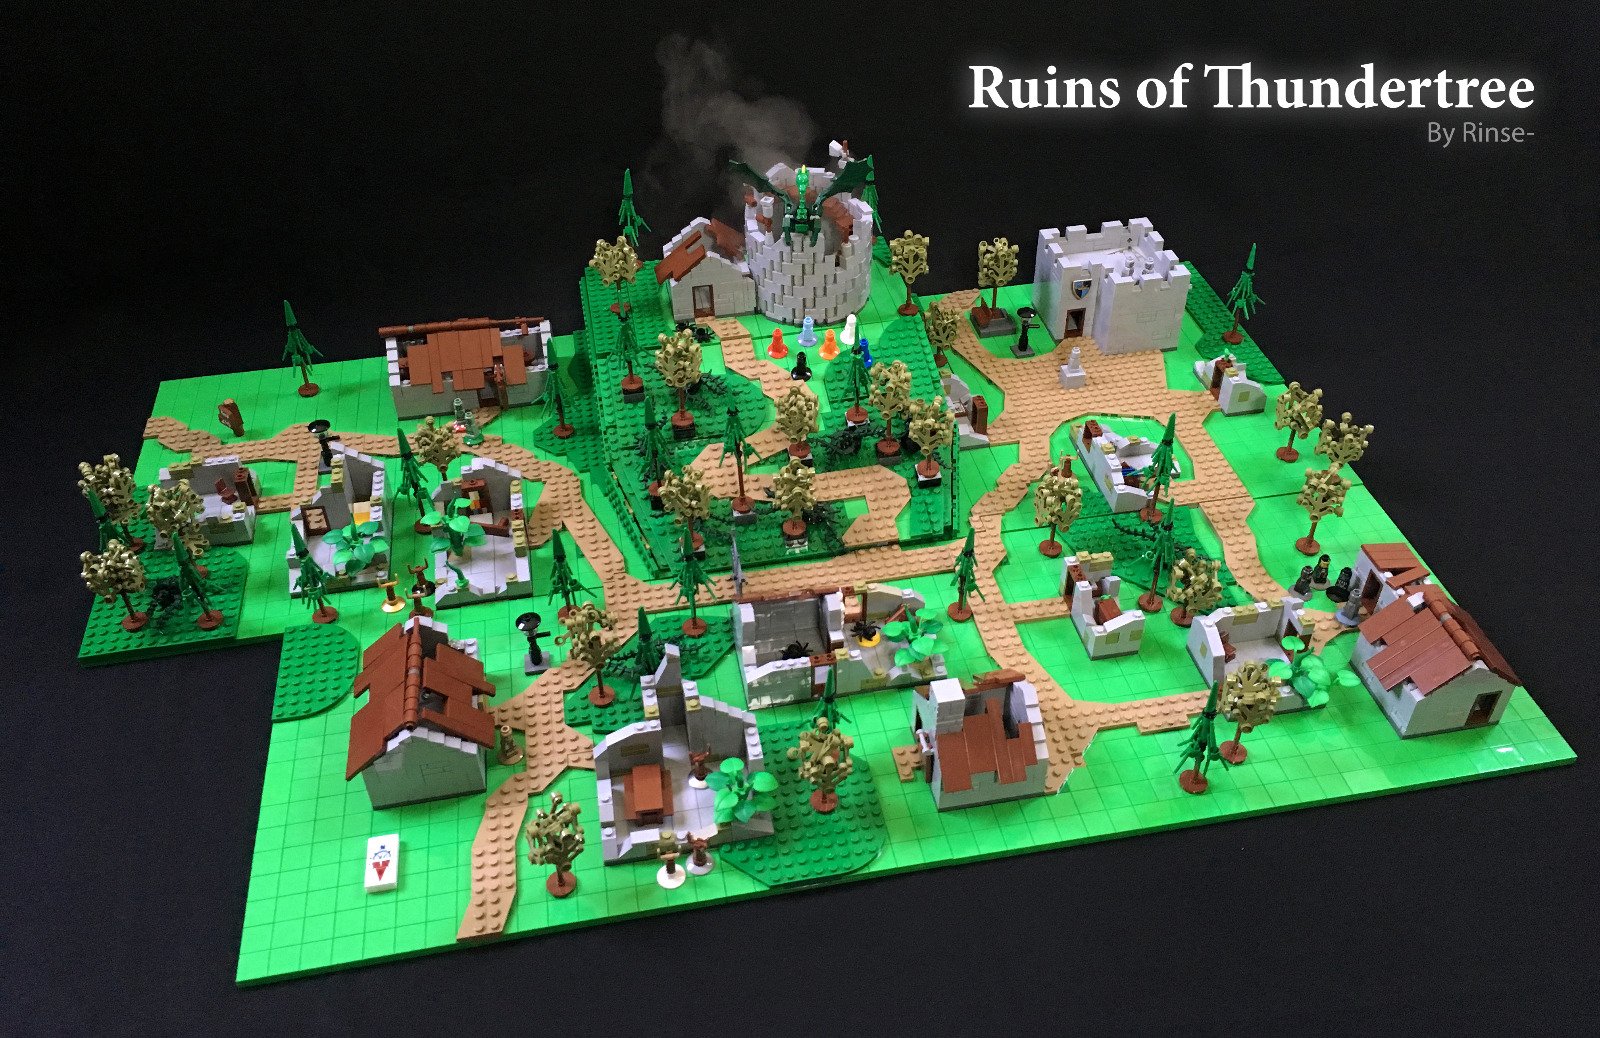 modvirke kontoførende Sequel LEGO Dungeons & Dragons: Build for Initiative - BrickNerd - All things LEGO  and the LEGO fan community